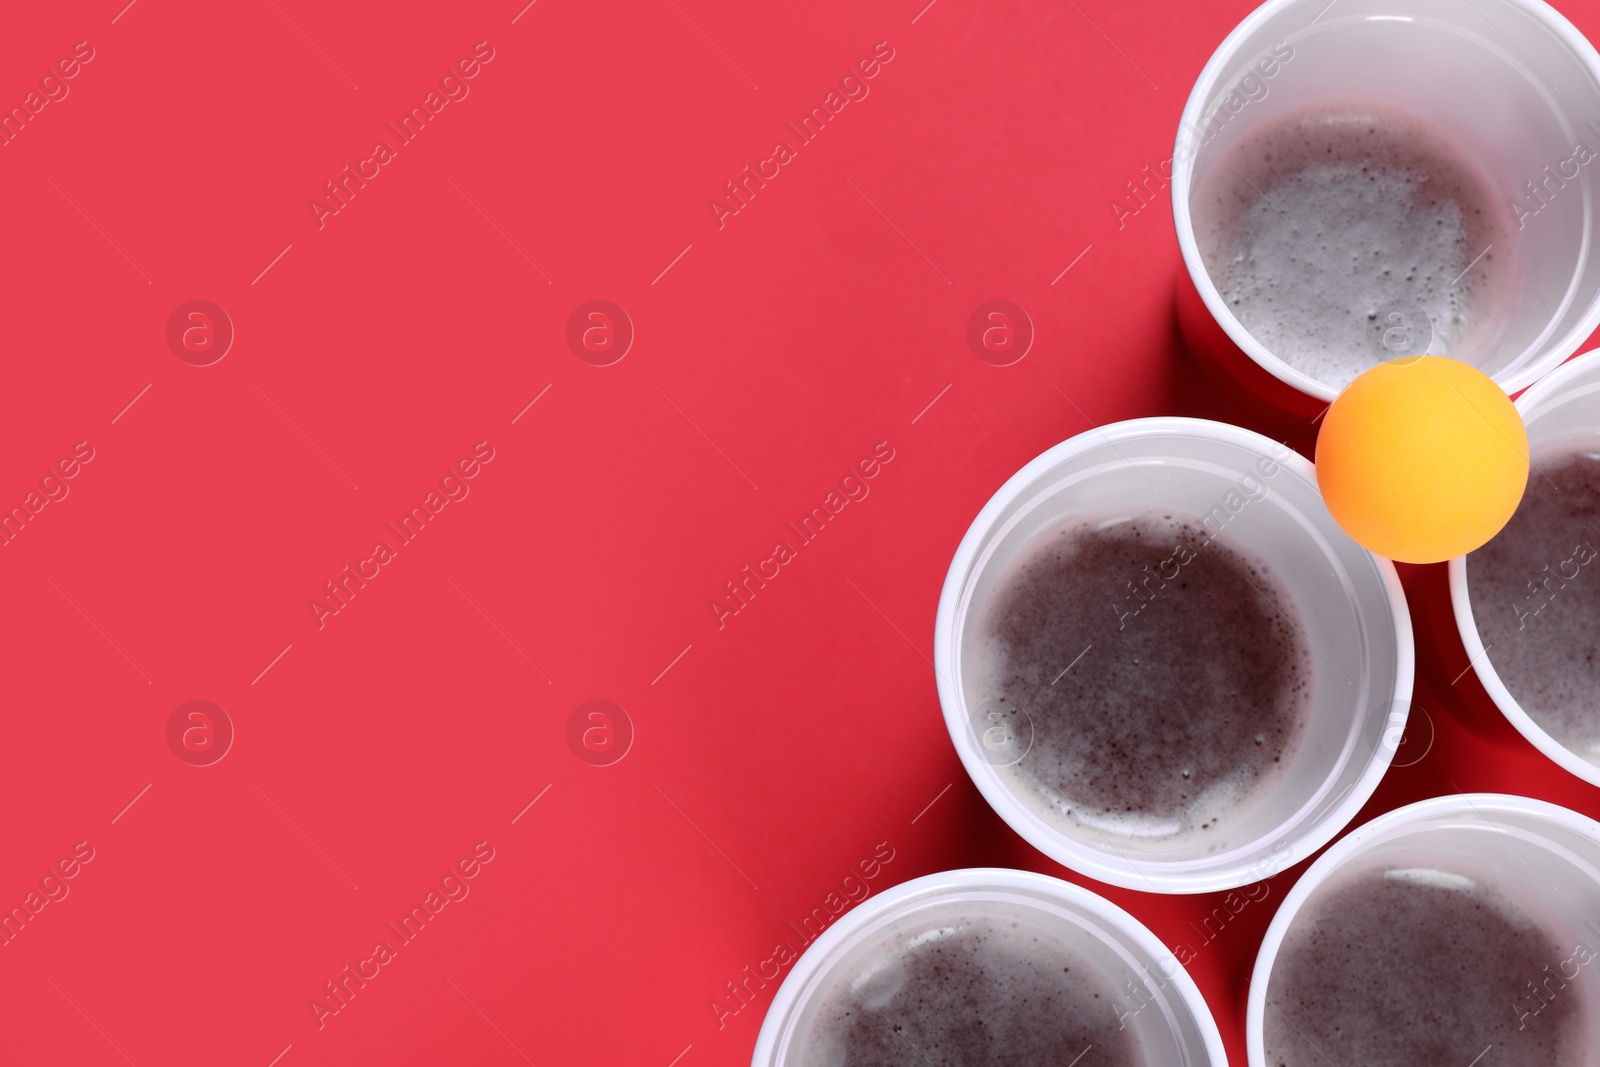 Photo of Plastic cups and ball on red background, flat lay with space for text. Beer pong game